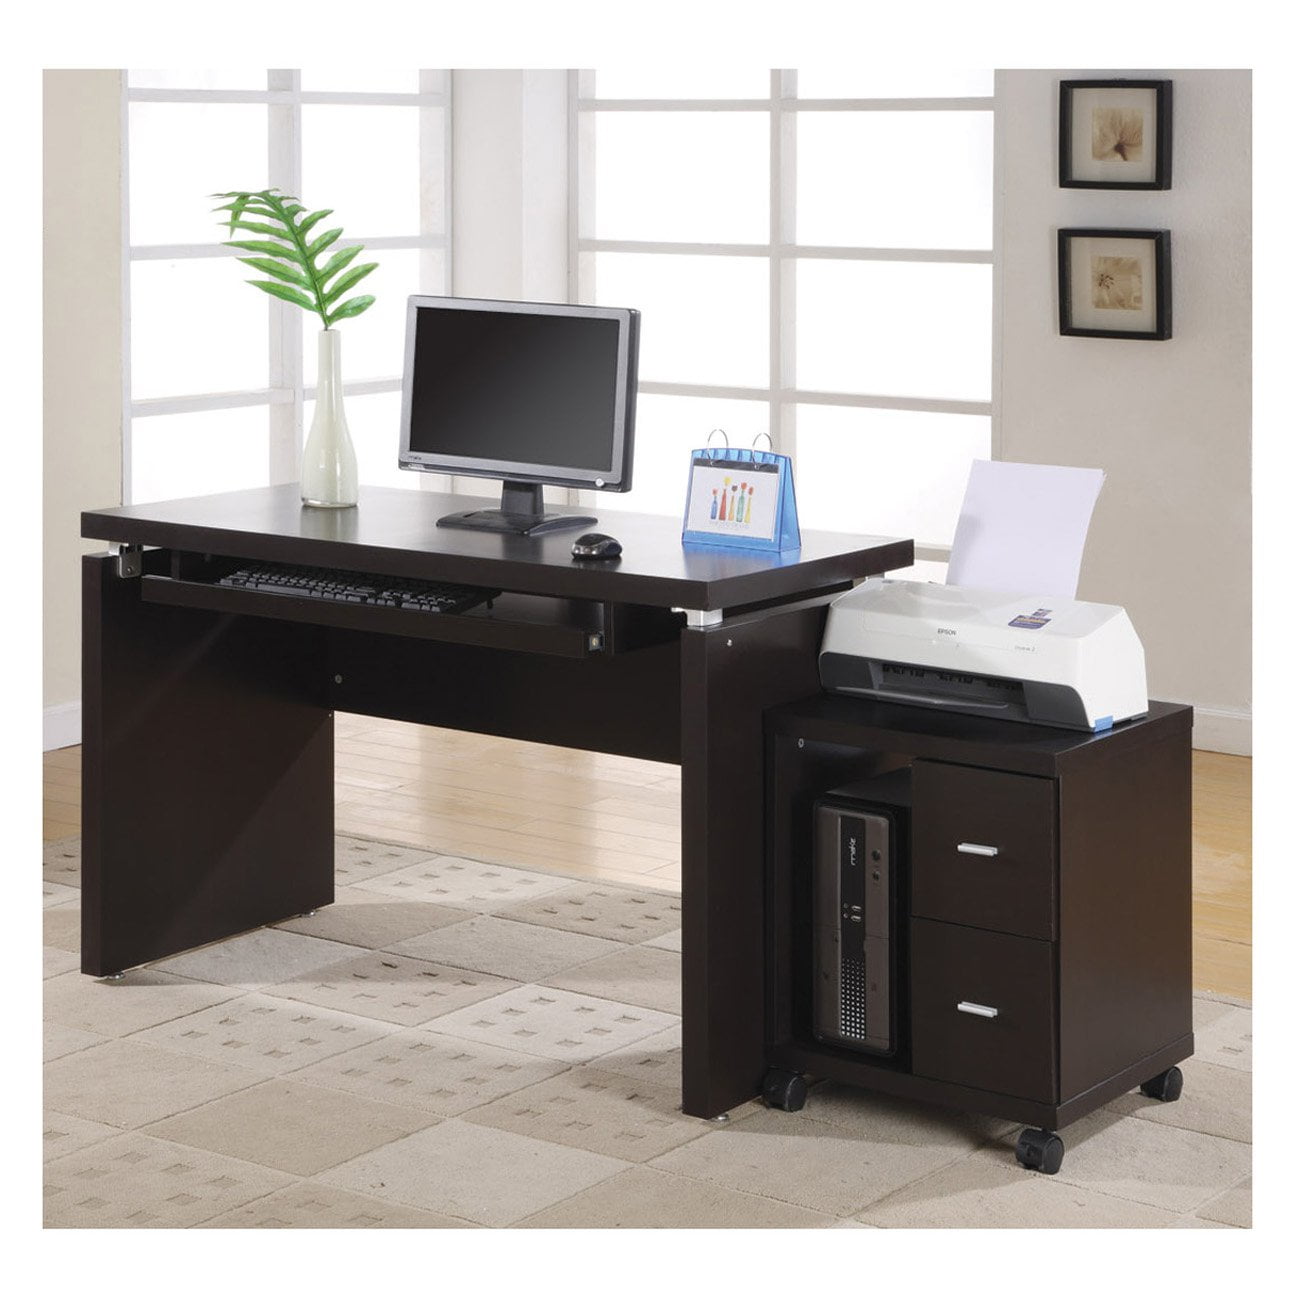 Monarch Cappuccino 48 in. Computer Desk with 2 Drawer ...